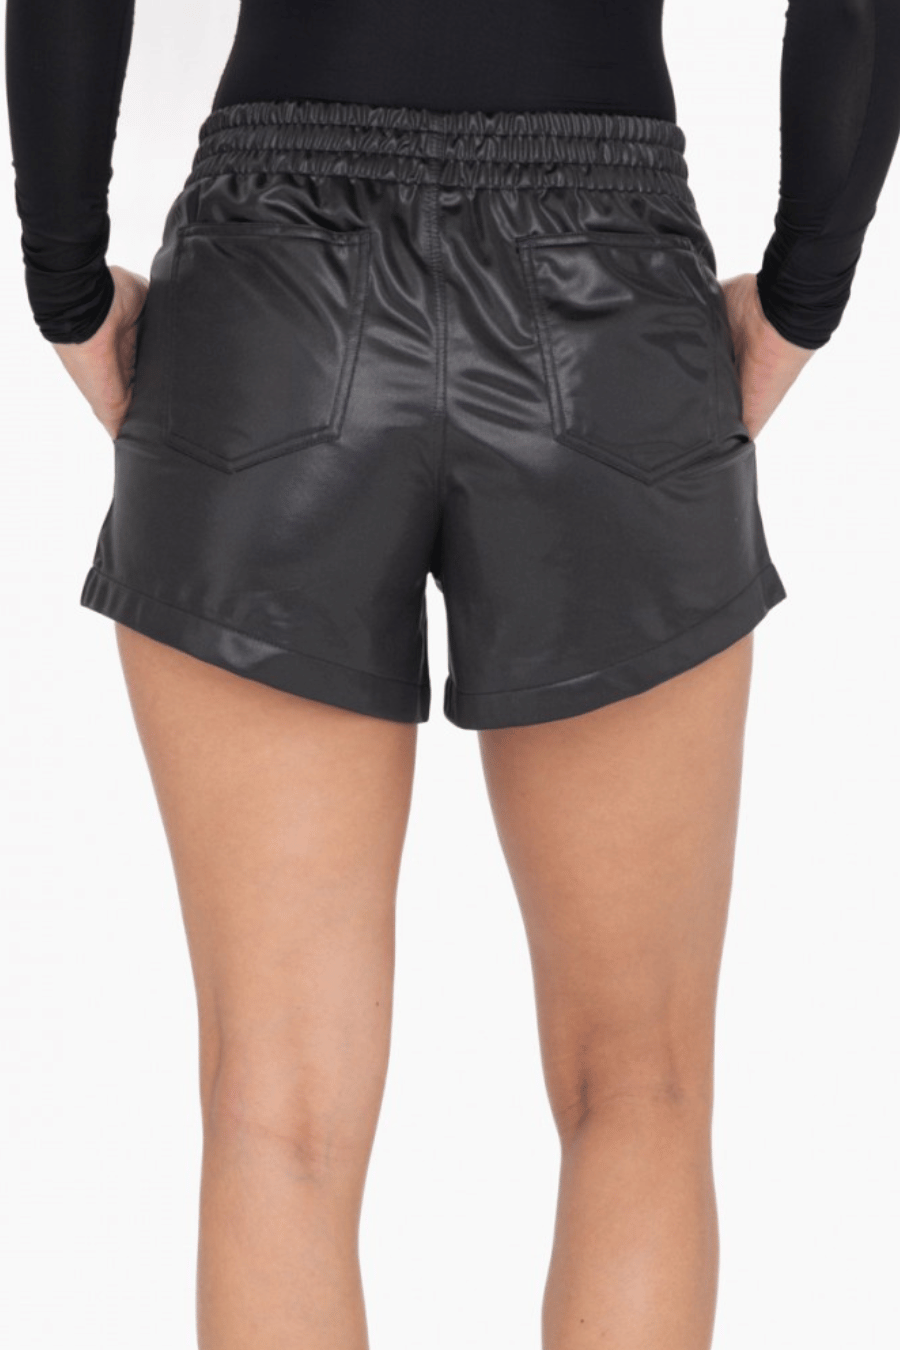 Glossy Leather Look High Waist Shorts